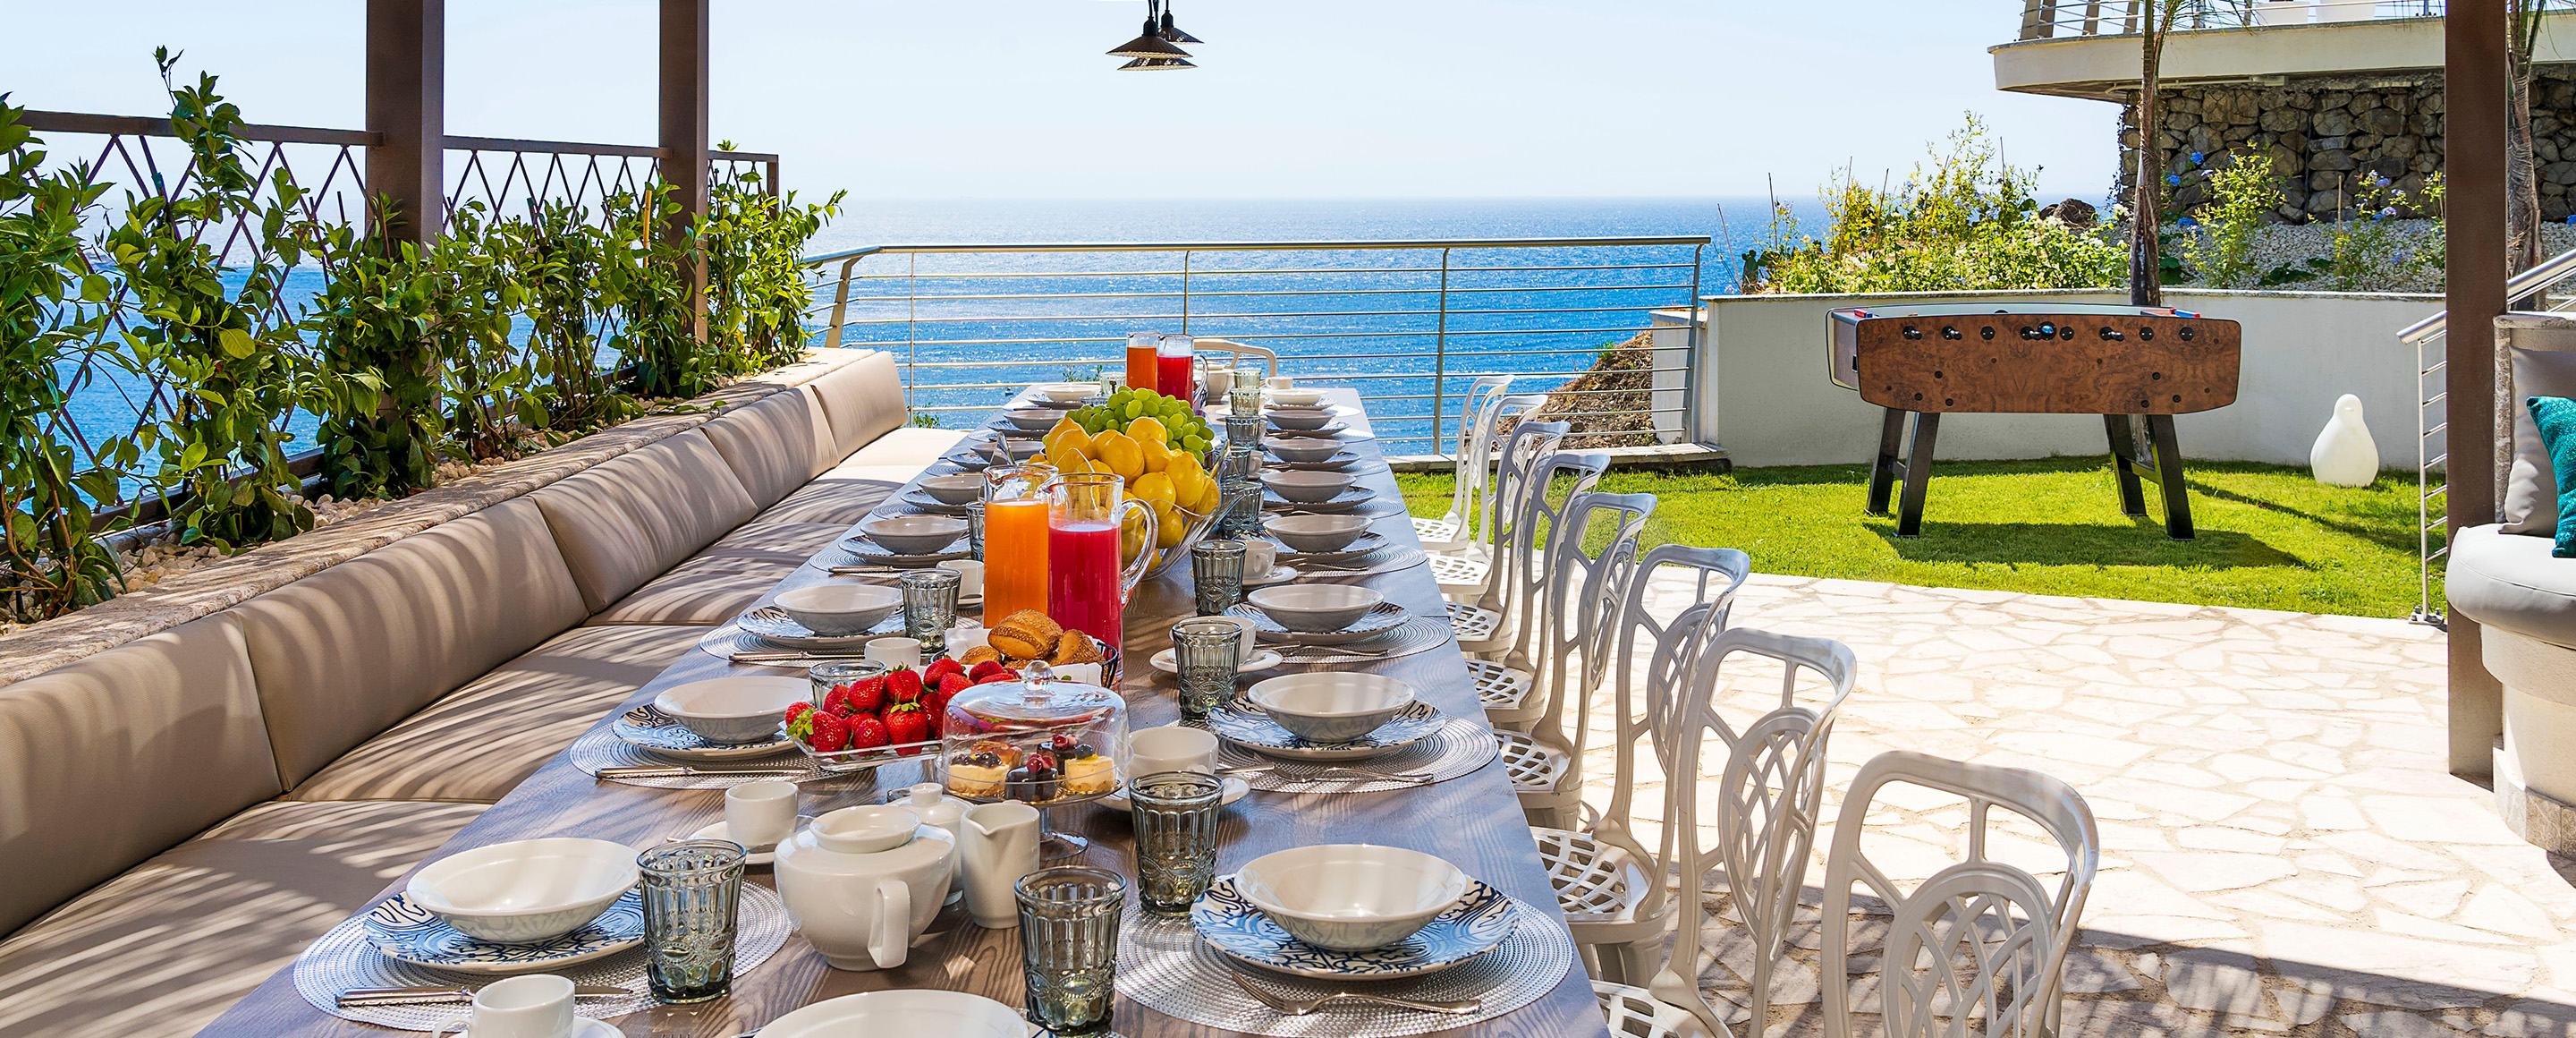 Our exclusive concierge services for a relaxing and carefree villa holiday in Sicily